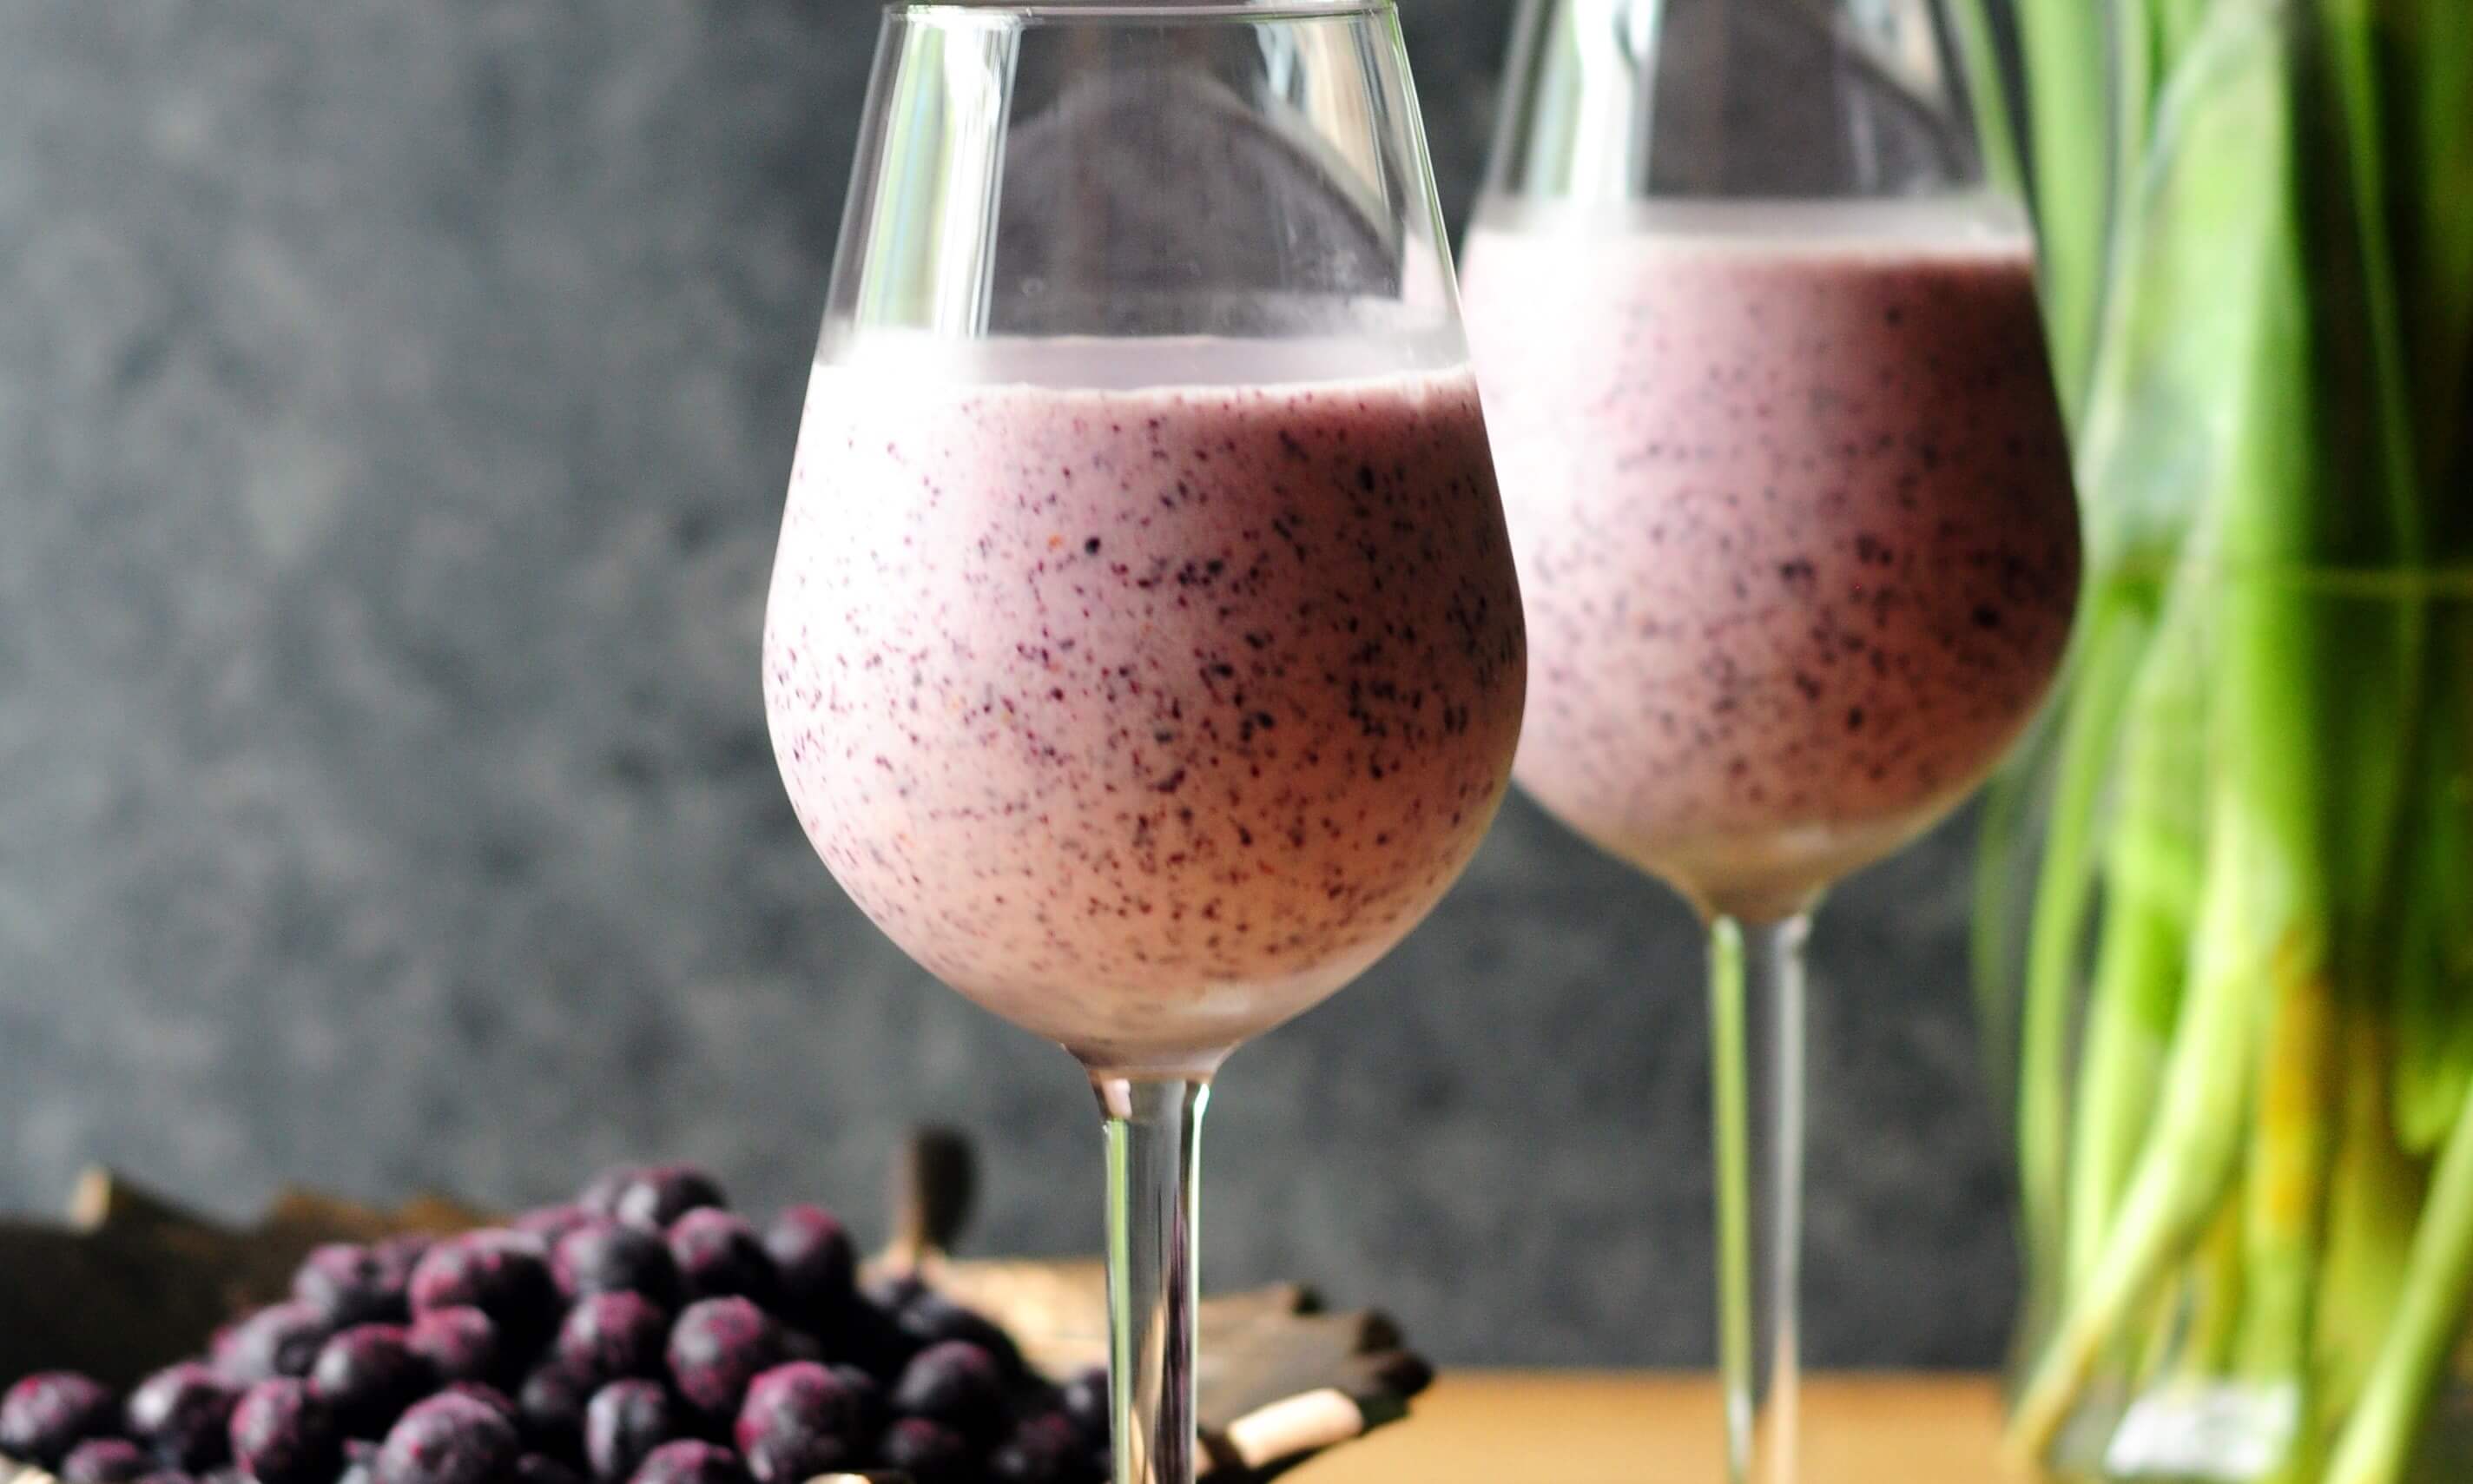 acne busting smoothie